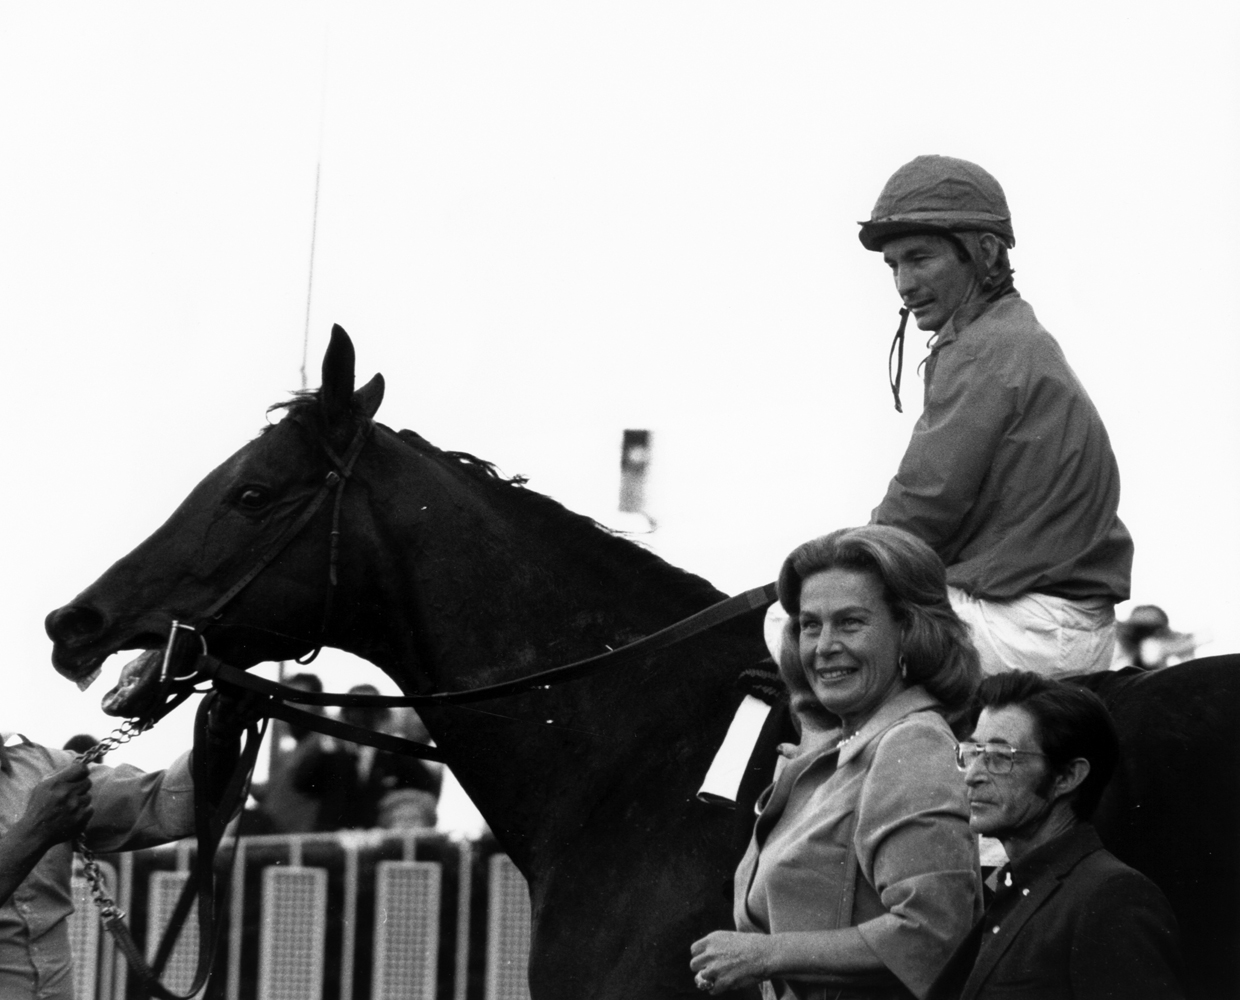 Cougar II (Bill Shoemaker up) in the winner's circle for the 1973 Century Handicap (Bill Mochon/Museum Collection)